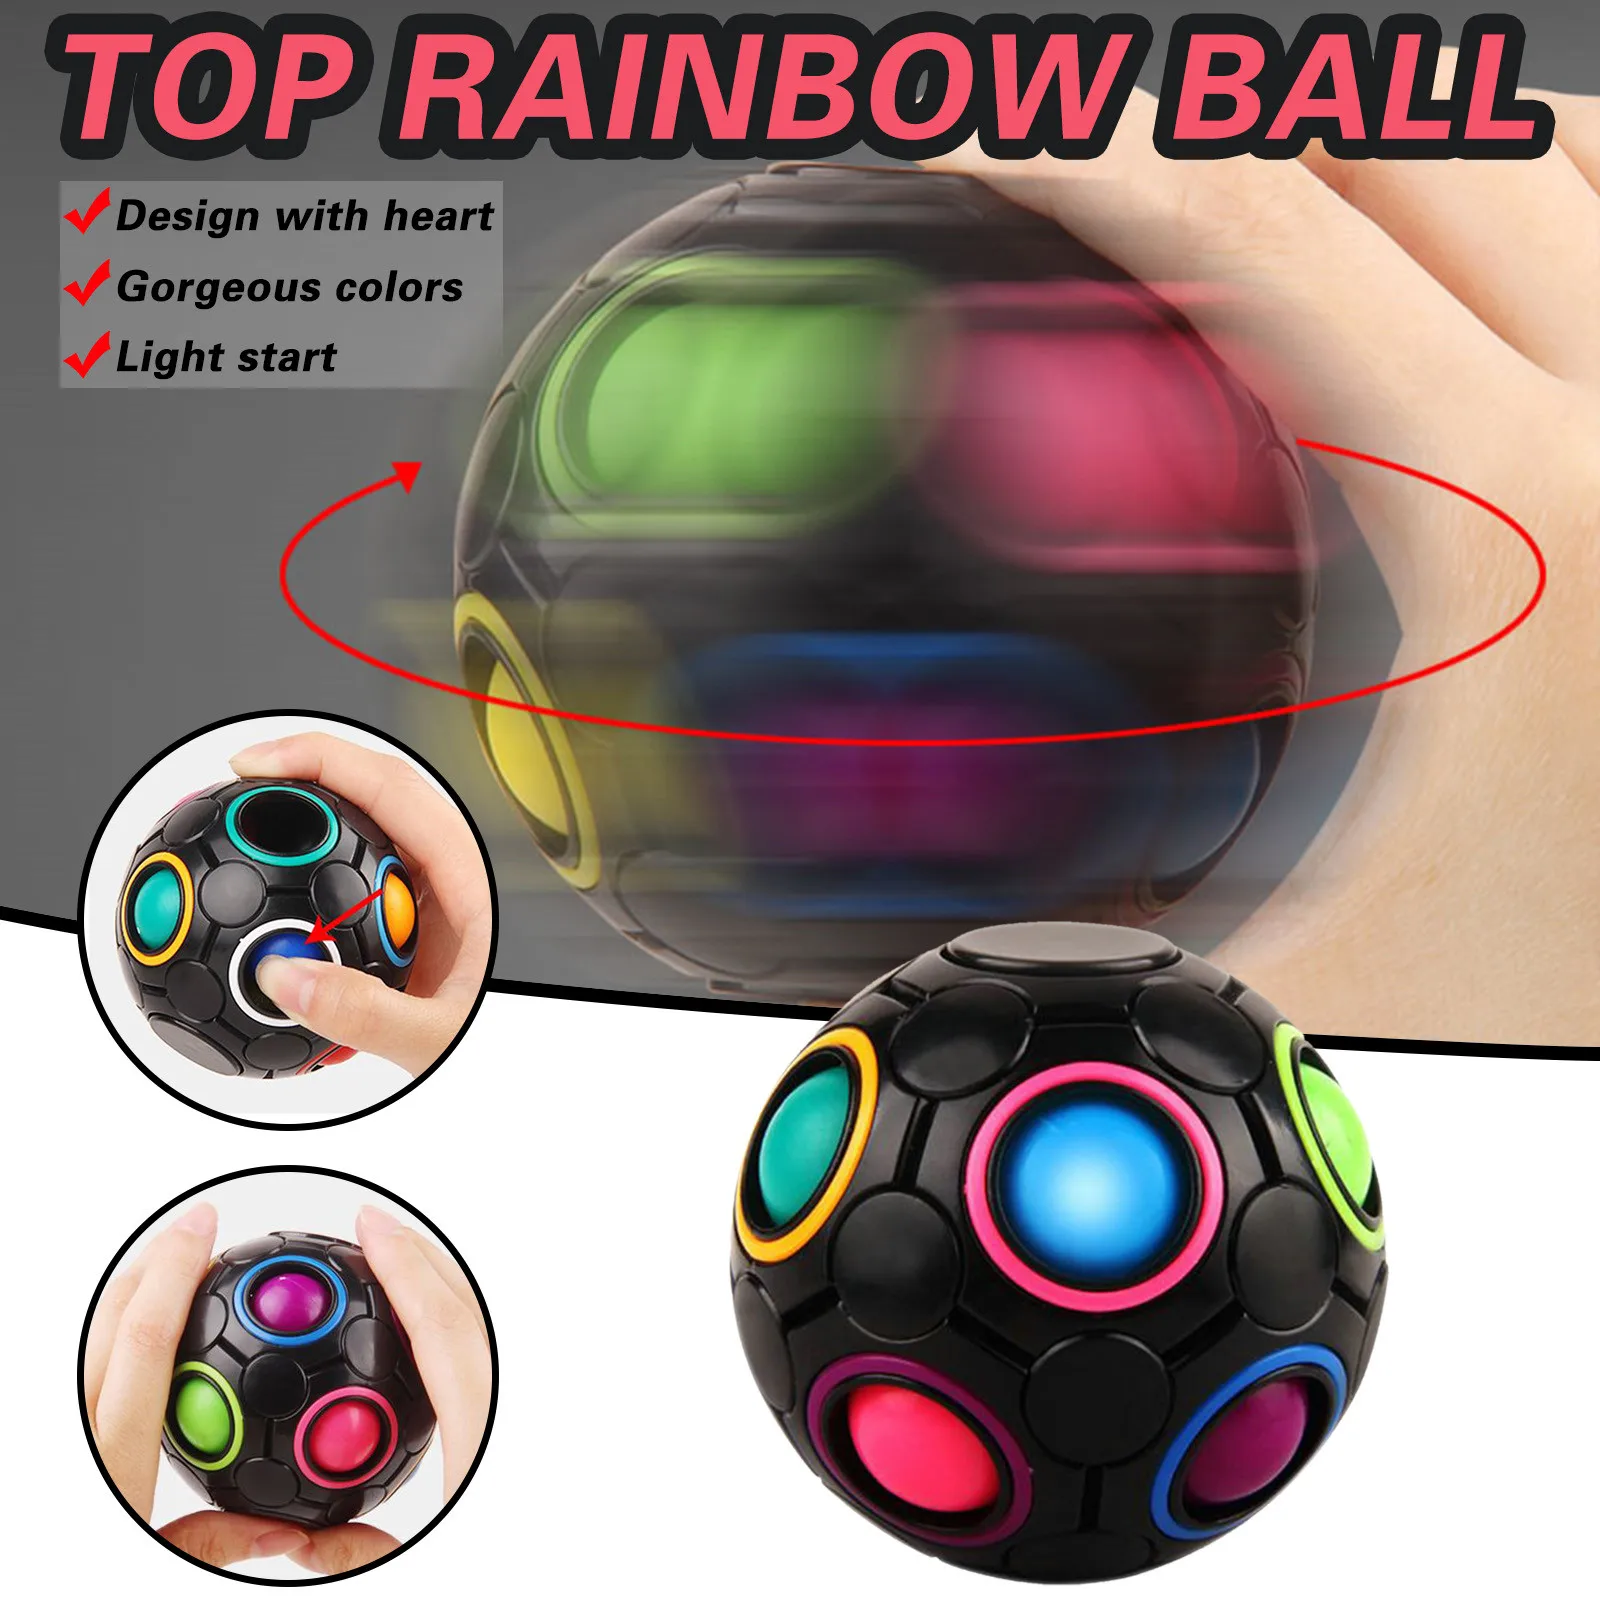 Cubeball colors find places fun game 